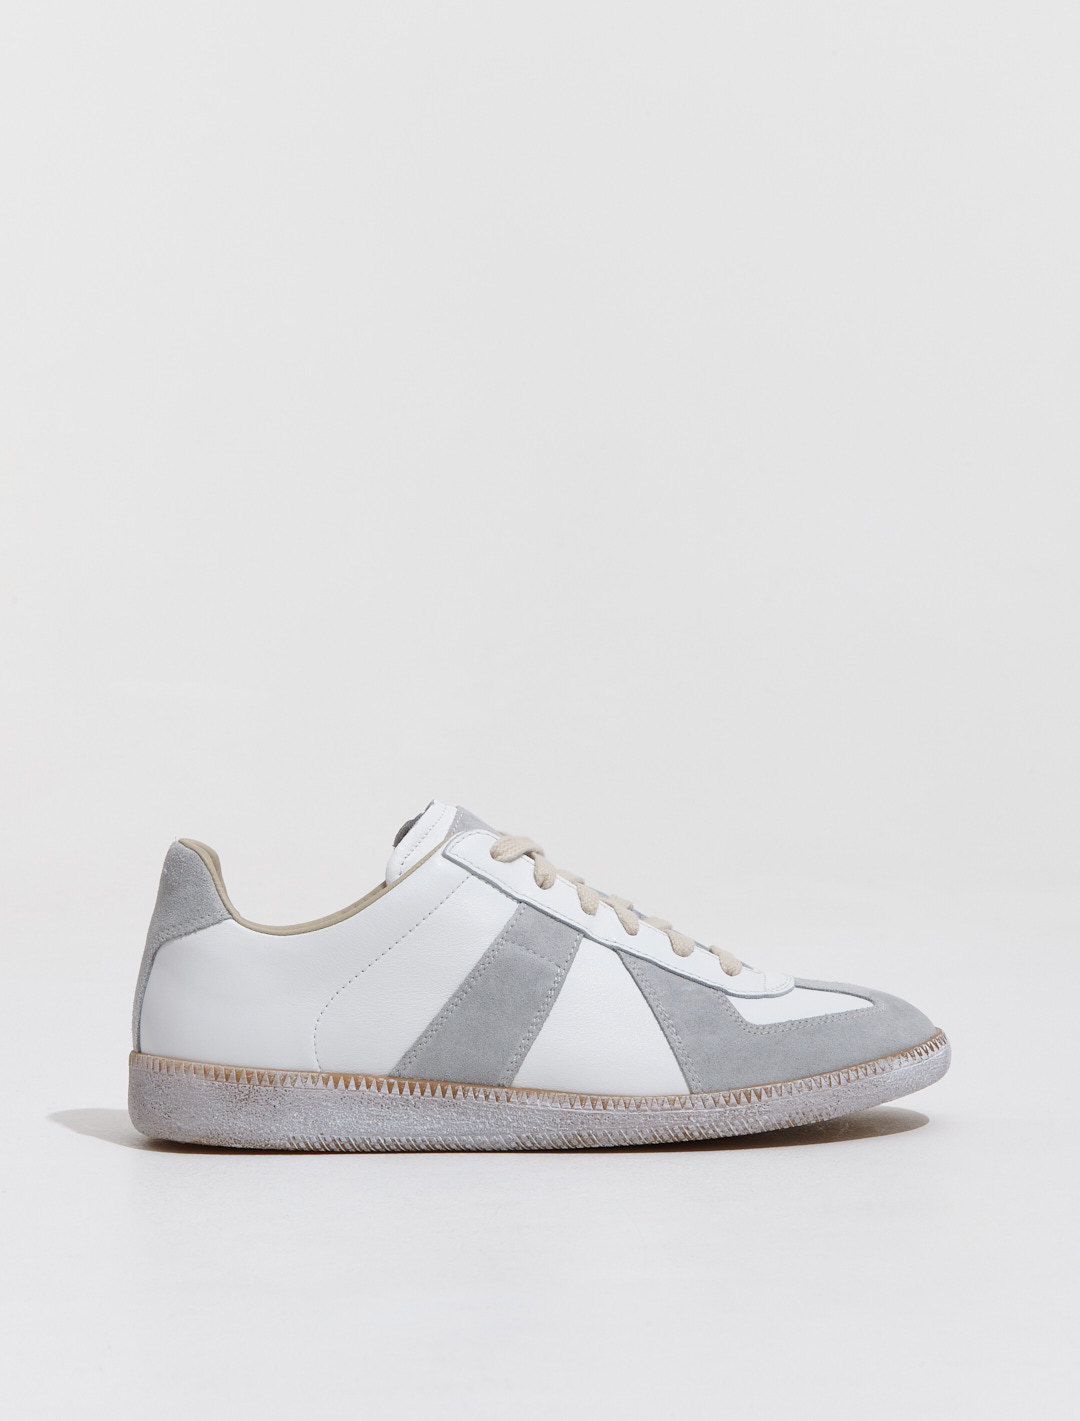 Maison Margiela Painted Replica Low Top Sneakers in Off-White | Voo ...